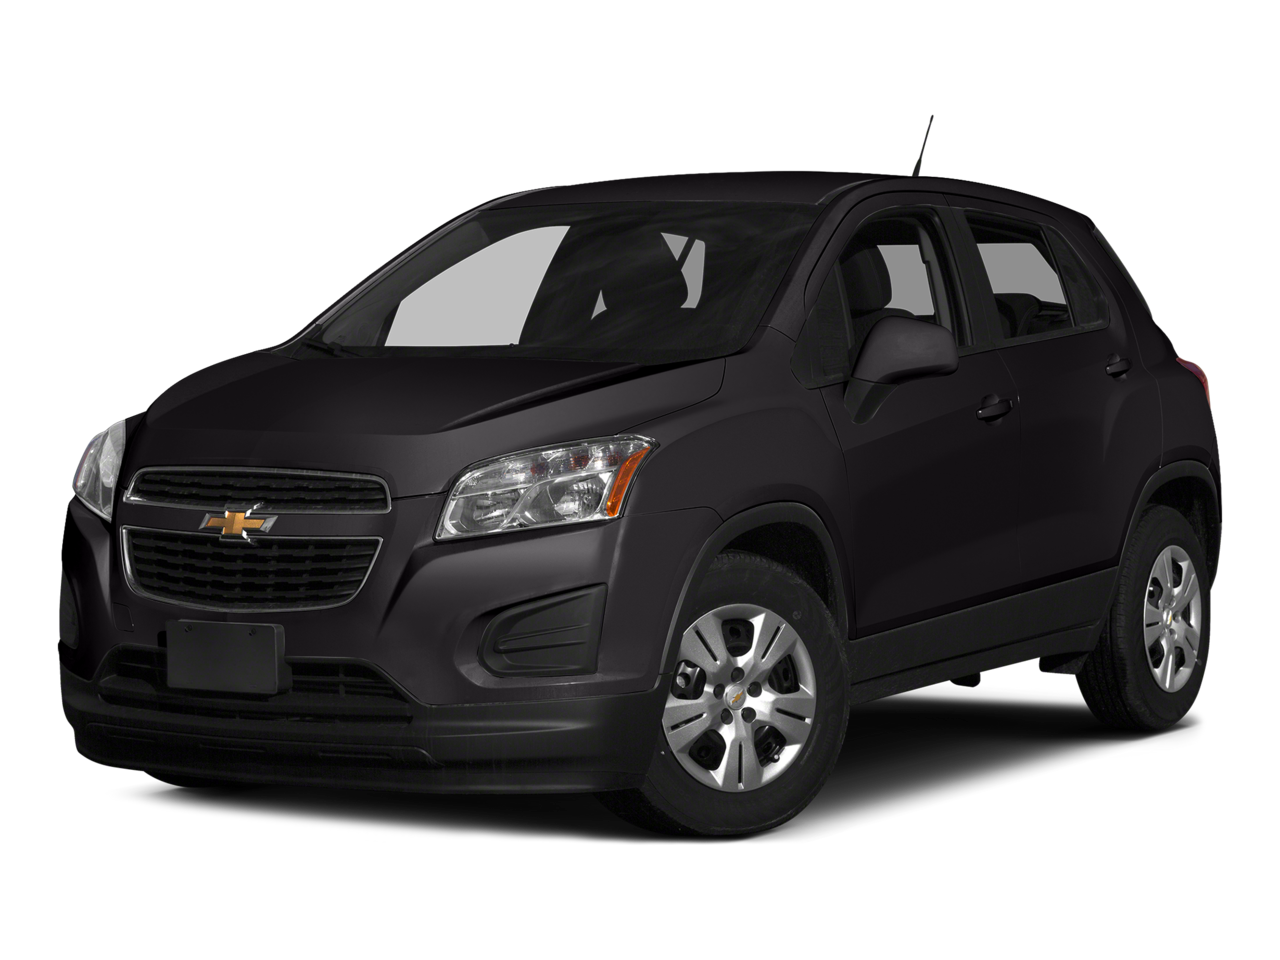 2015 Chevrolet Trax Repair: Service and Maintenance Cost